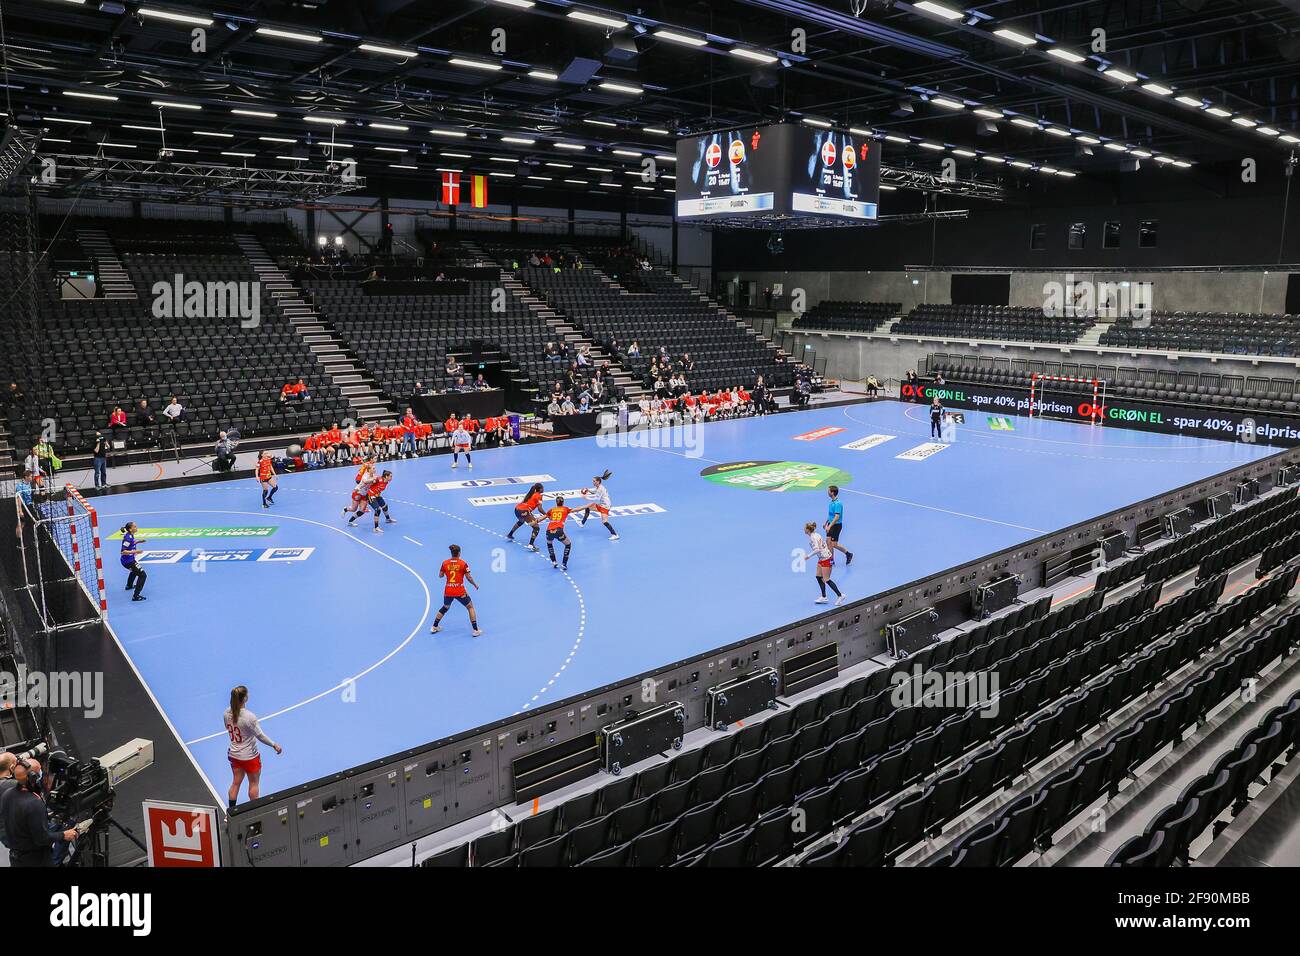 Handball Test Match High Stock Photography and Images - Alamy